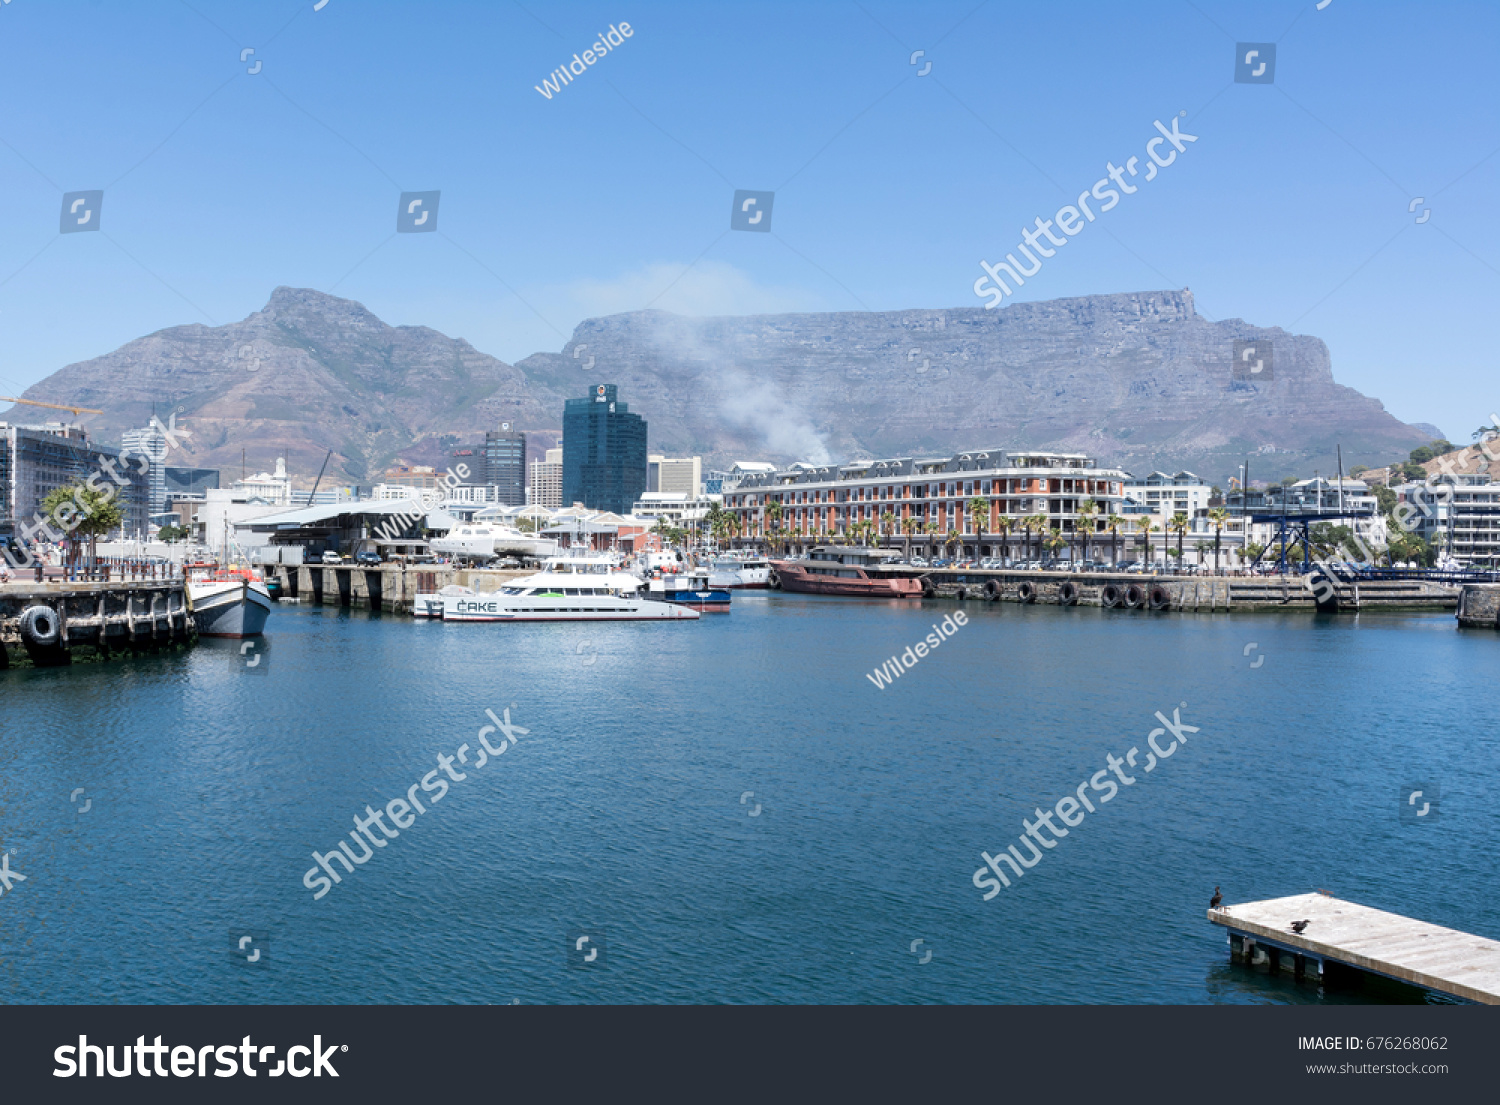 Cape Town, South Africa - March 02, 2017: Cape Town Harbour with Table Mountain in background #676268062